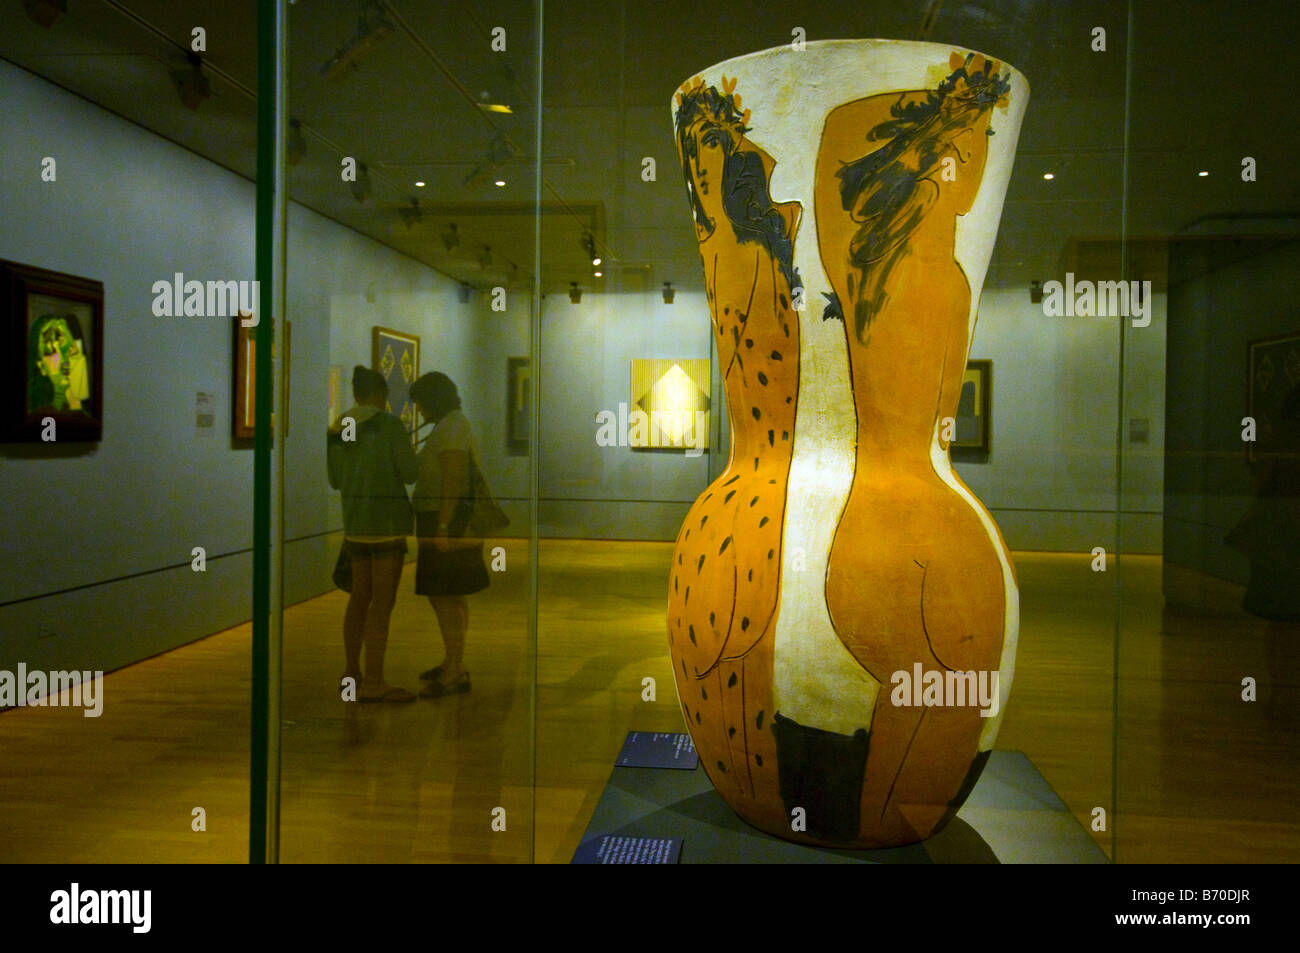 A ceramic vase in the National Gallery of Victoria in Melbourne by Pablo Picasso Stock Photo